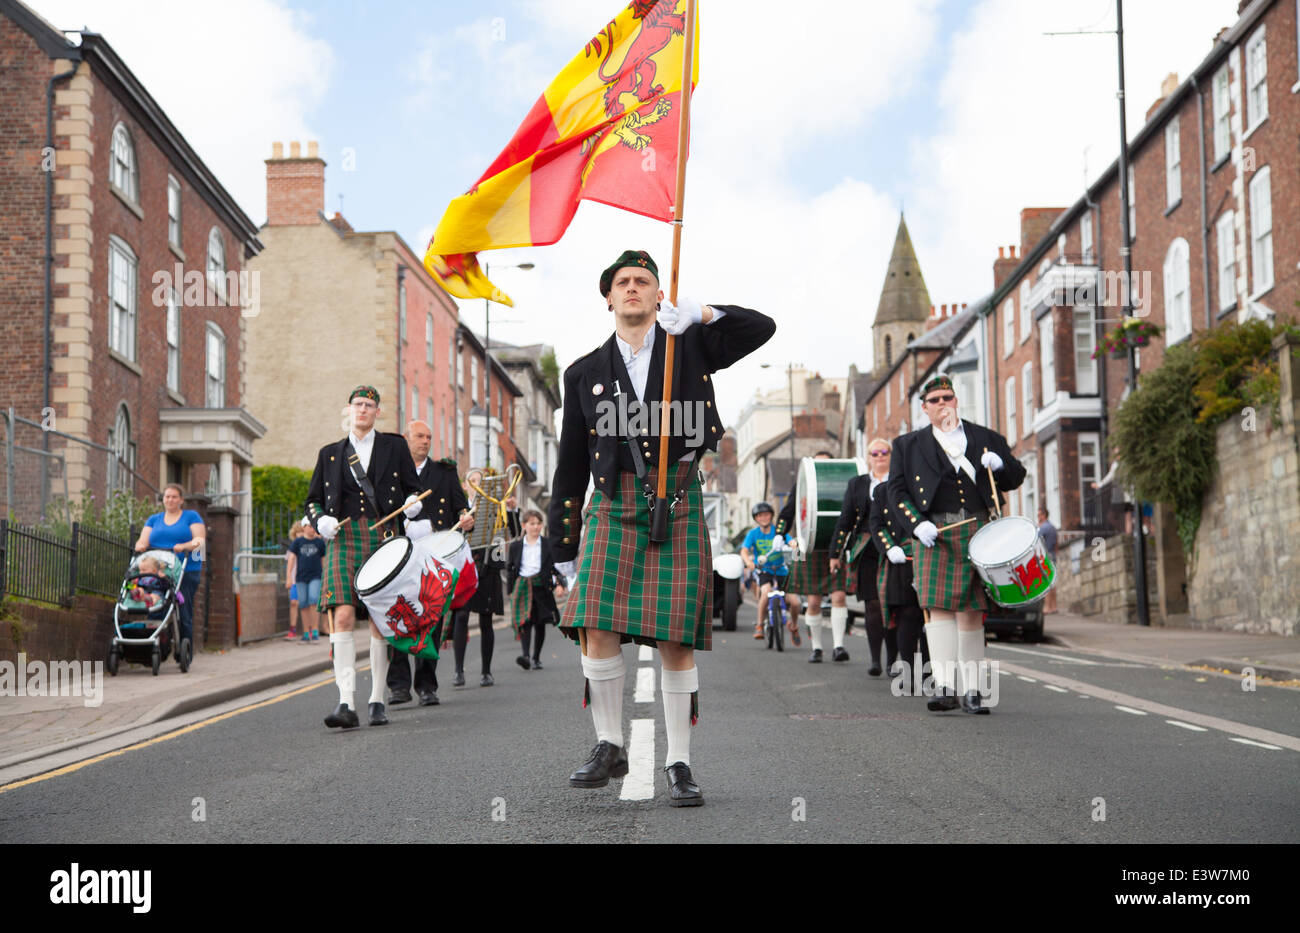 Cambria Band  a Welsh marching band with drummers in Welsh kilts, Owain Glyndwr Welsh flag and berets marching in Denbigh Stock Photo